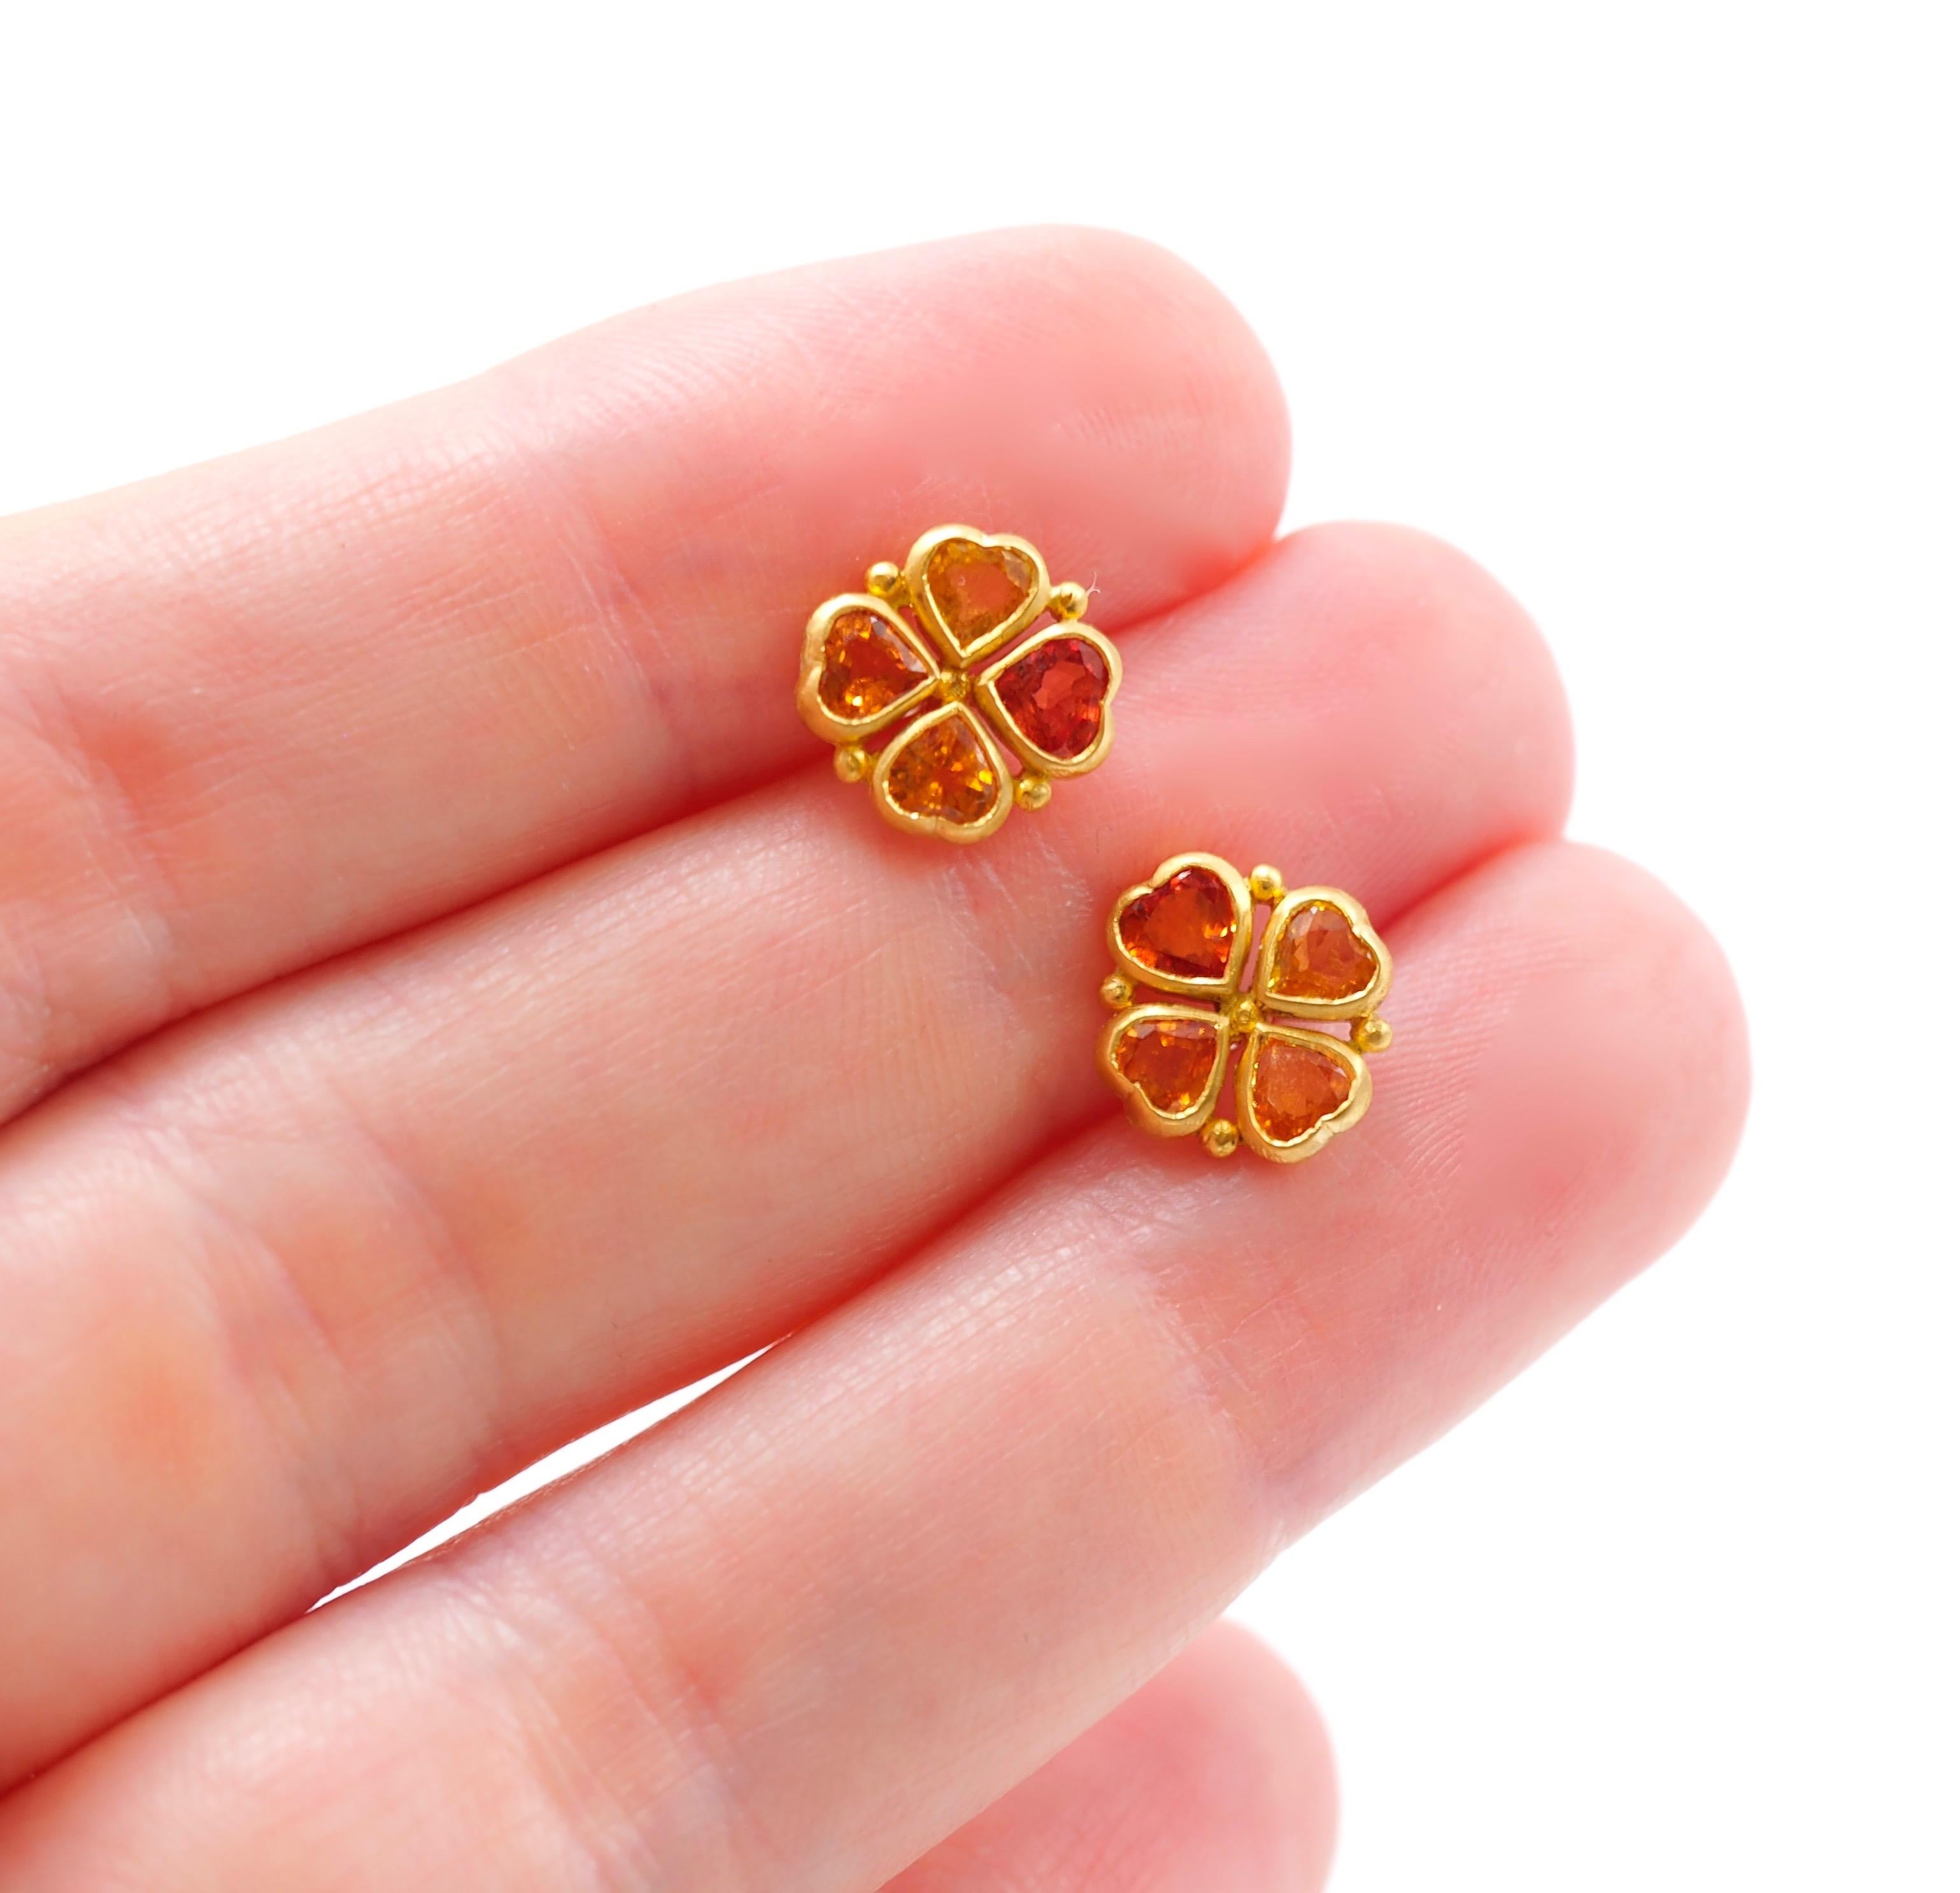 These earrings by Scrives are composed of 4 hearth shape sapphires (total weight of 1.38 cts). All 4 stones have different shapes and colours / hues from yellow to strong orange. 

The stones are set in gold (closed setting) and in the gaps, a gold